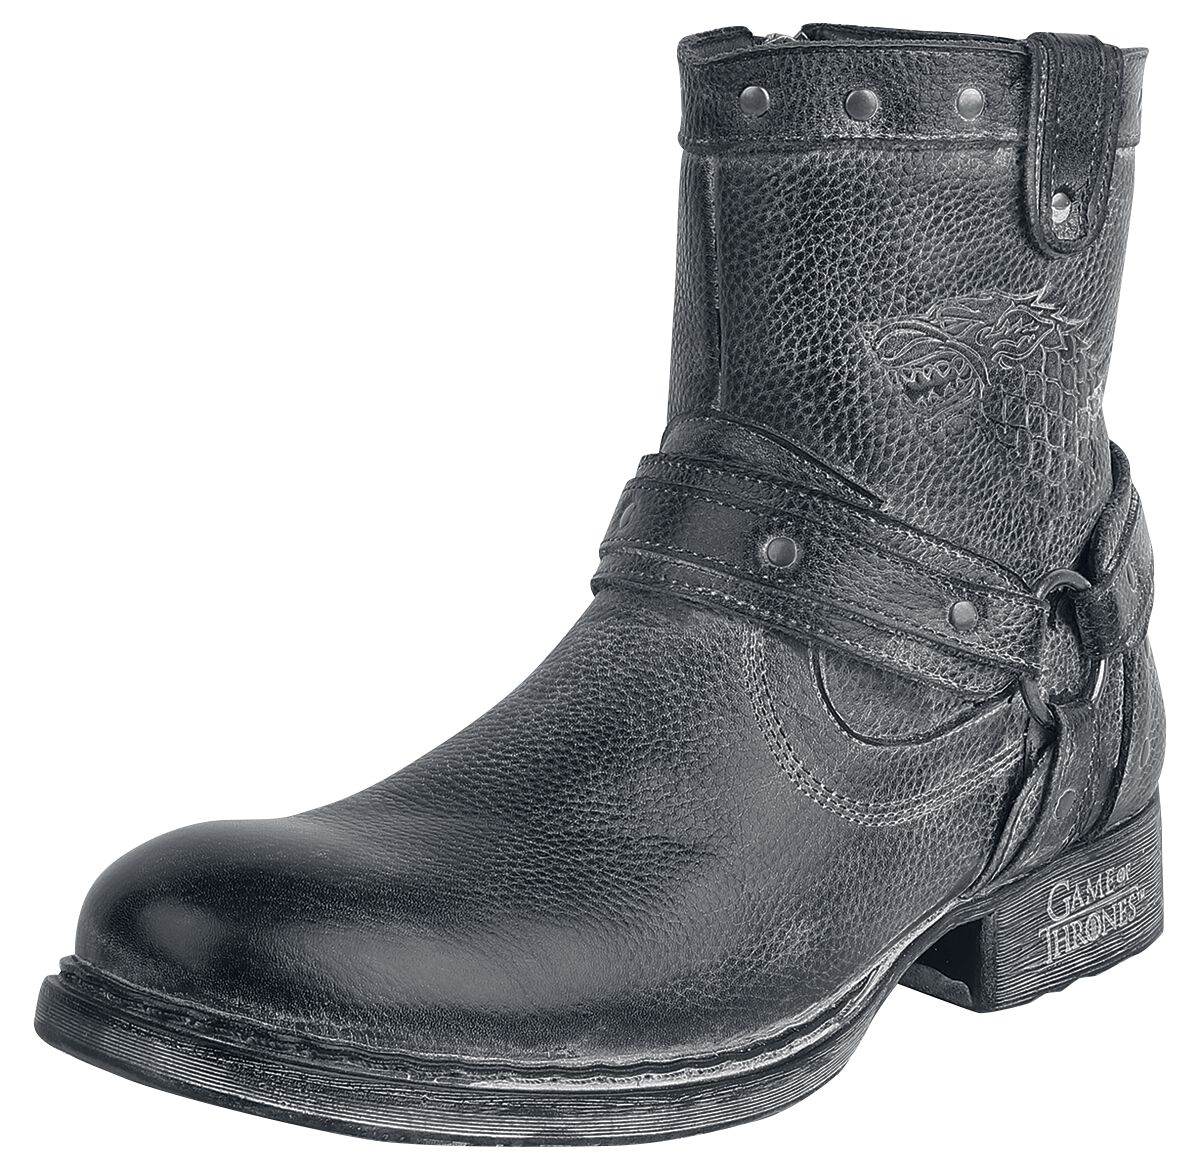 Game of Thrones House Stark Boot grey